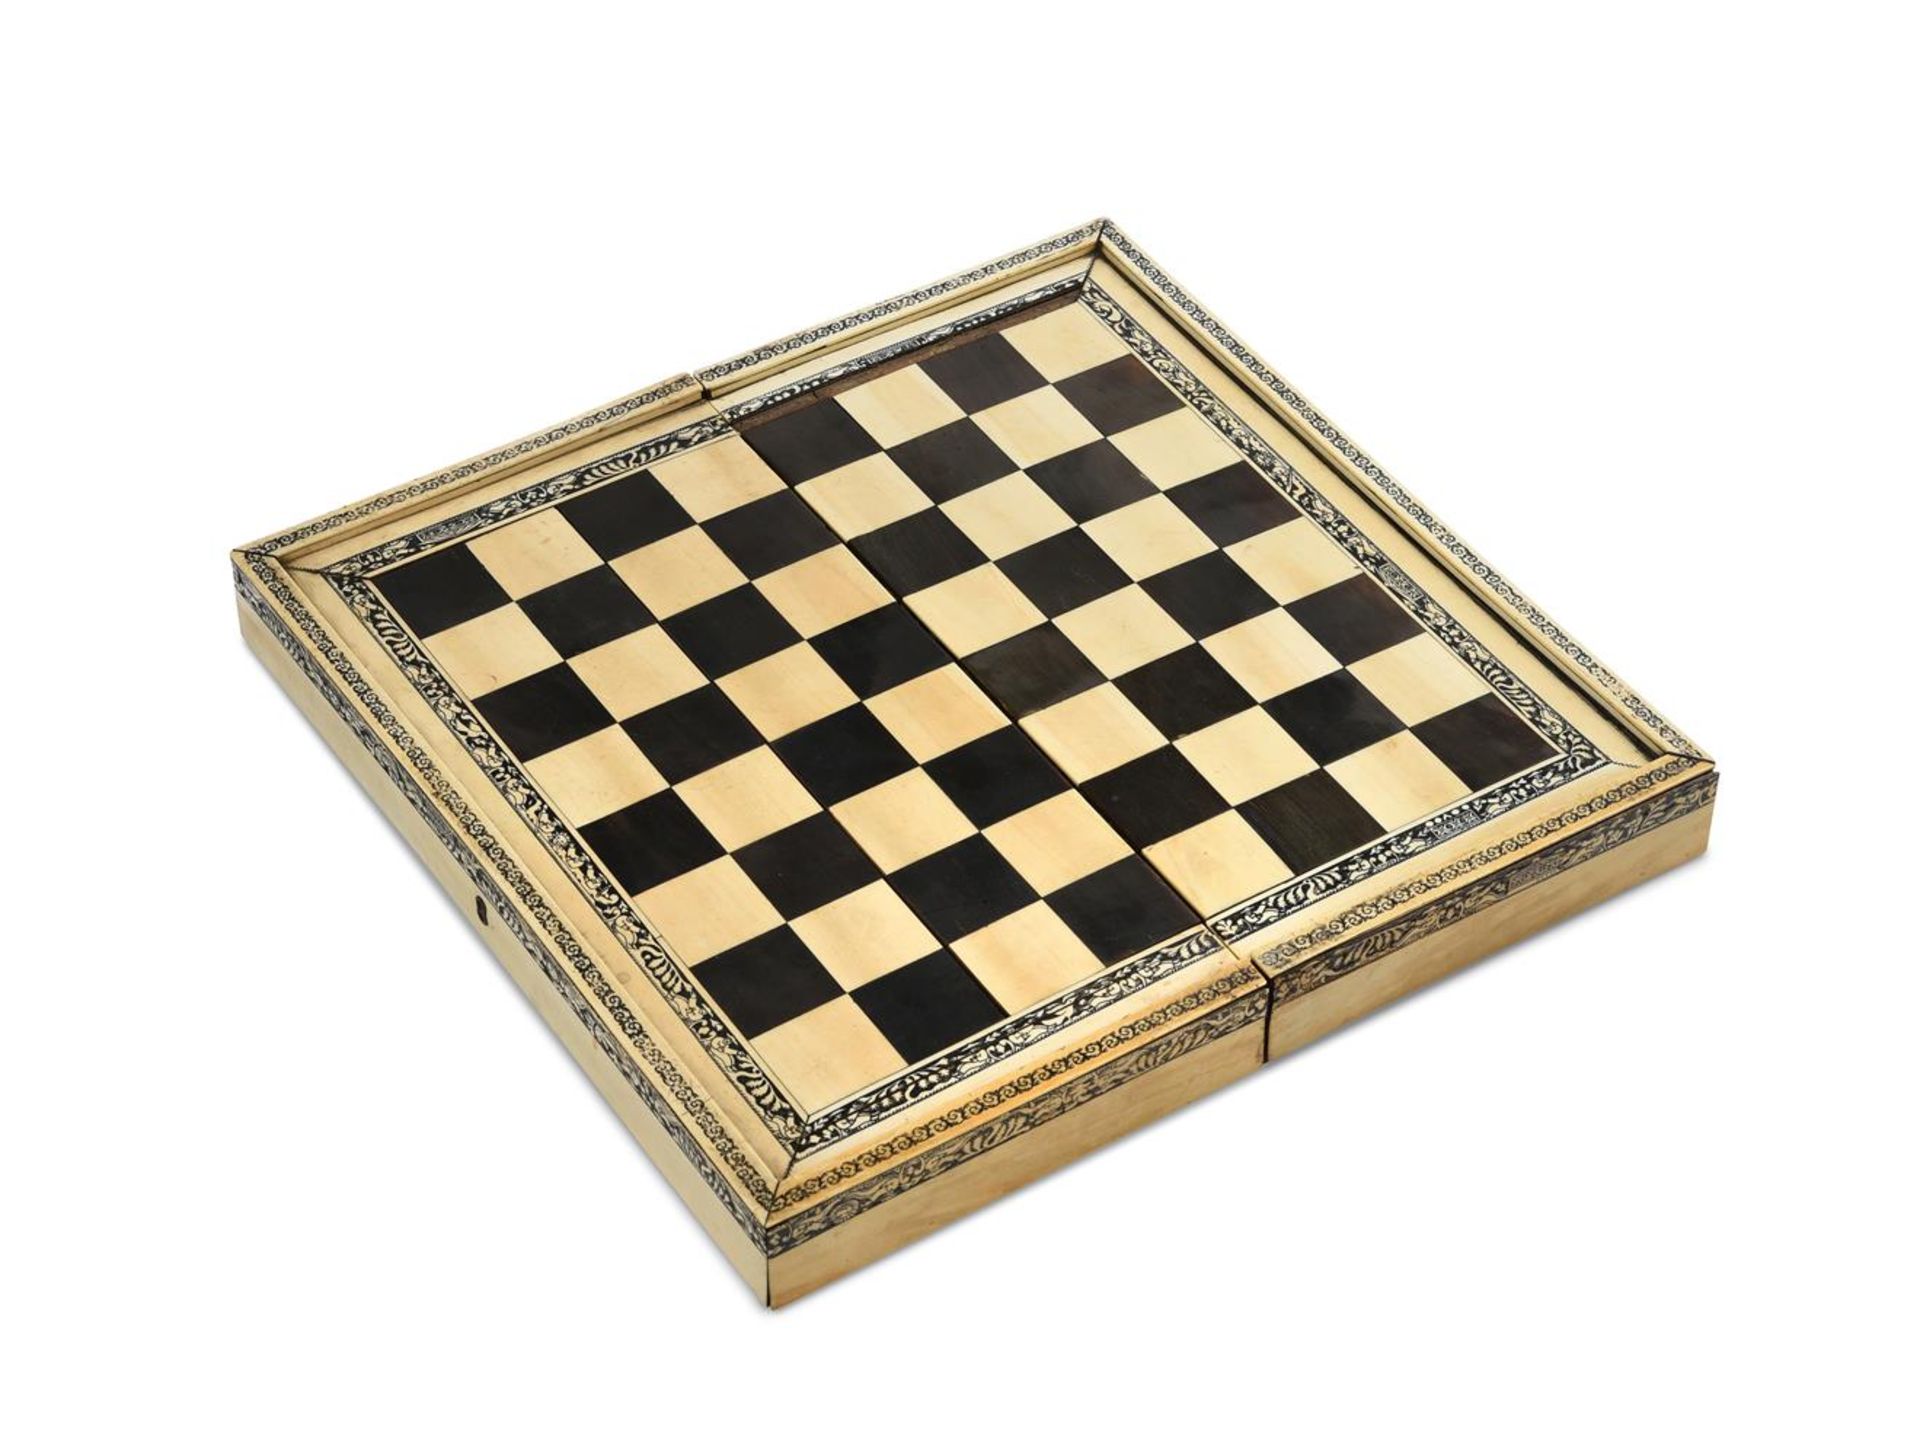 Y AN ANGLO-INDIAN PENWORK AND PARQUETRY IVORY GAMES BOX, VIZAGAPATAM, MID 19TH CENTURY